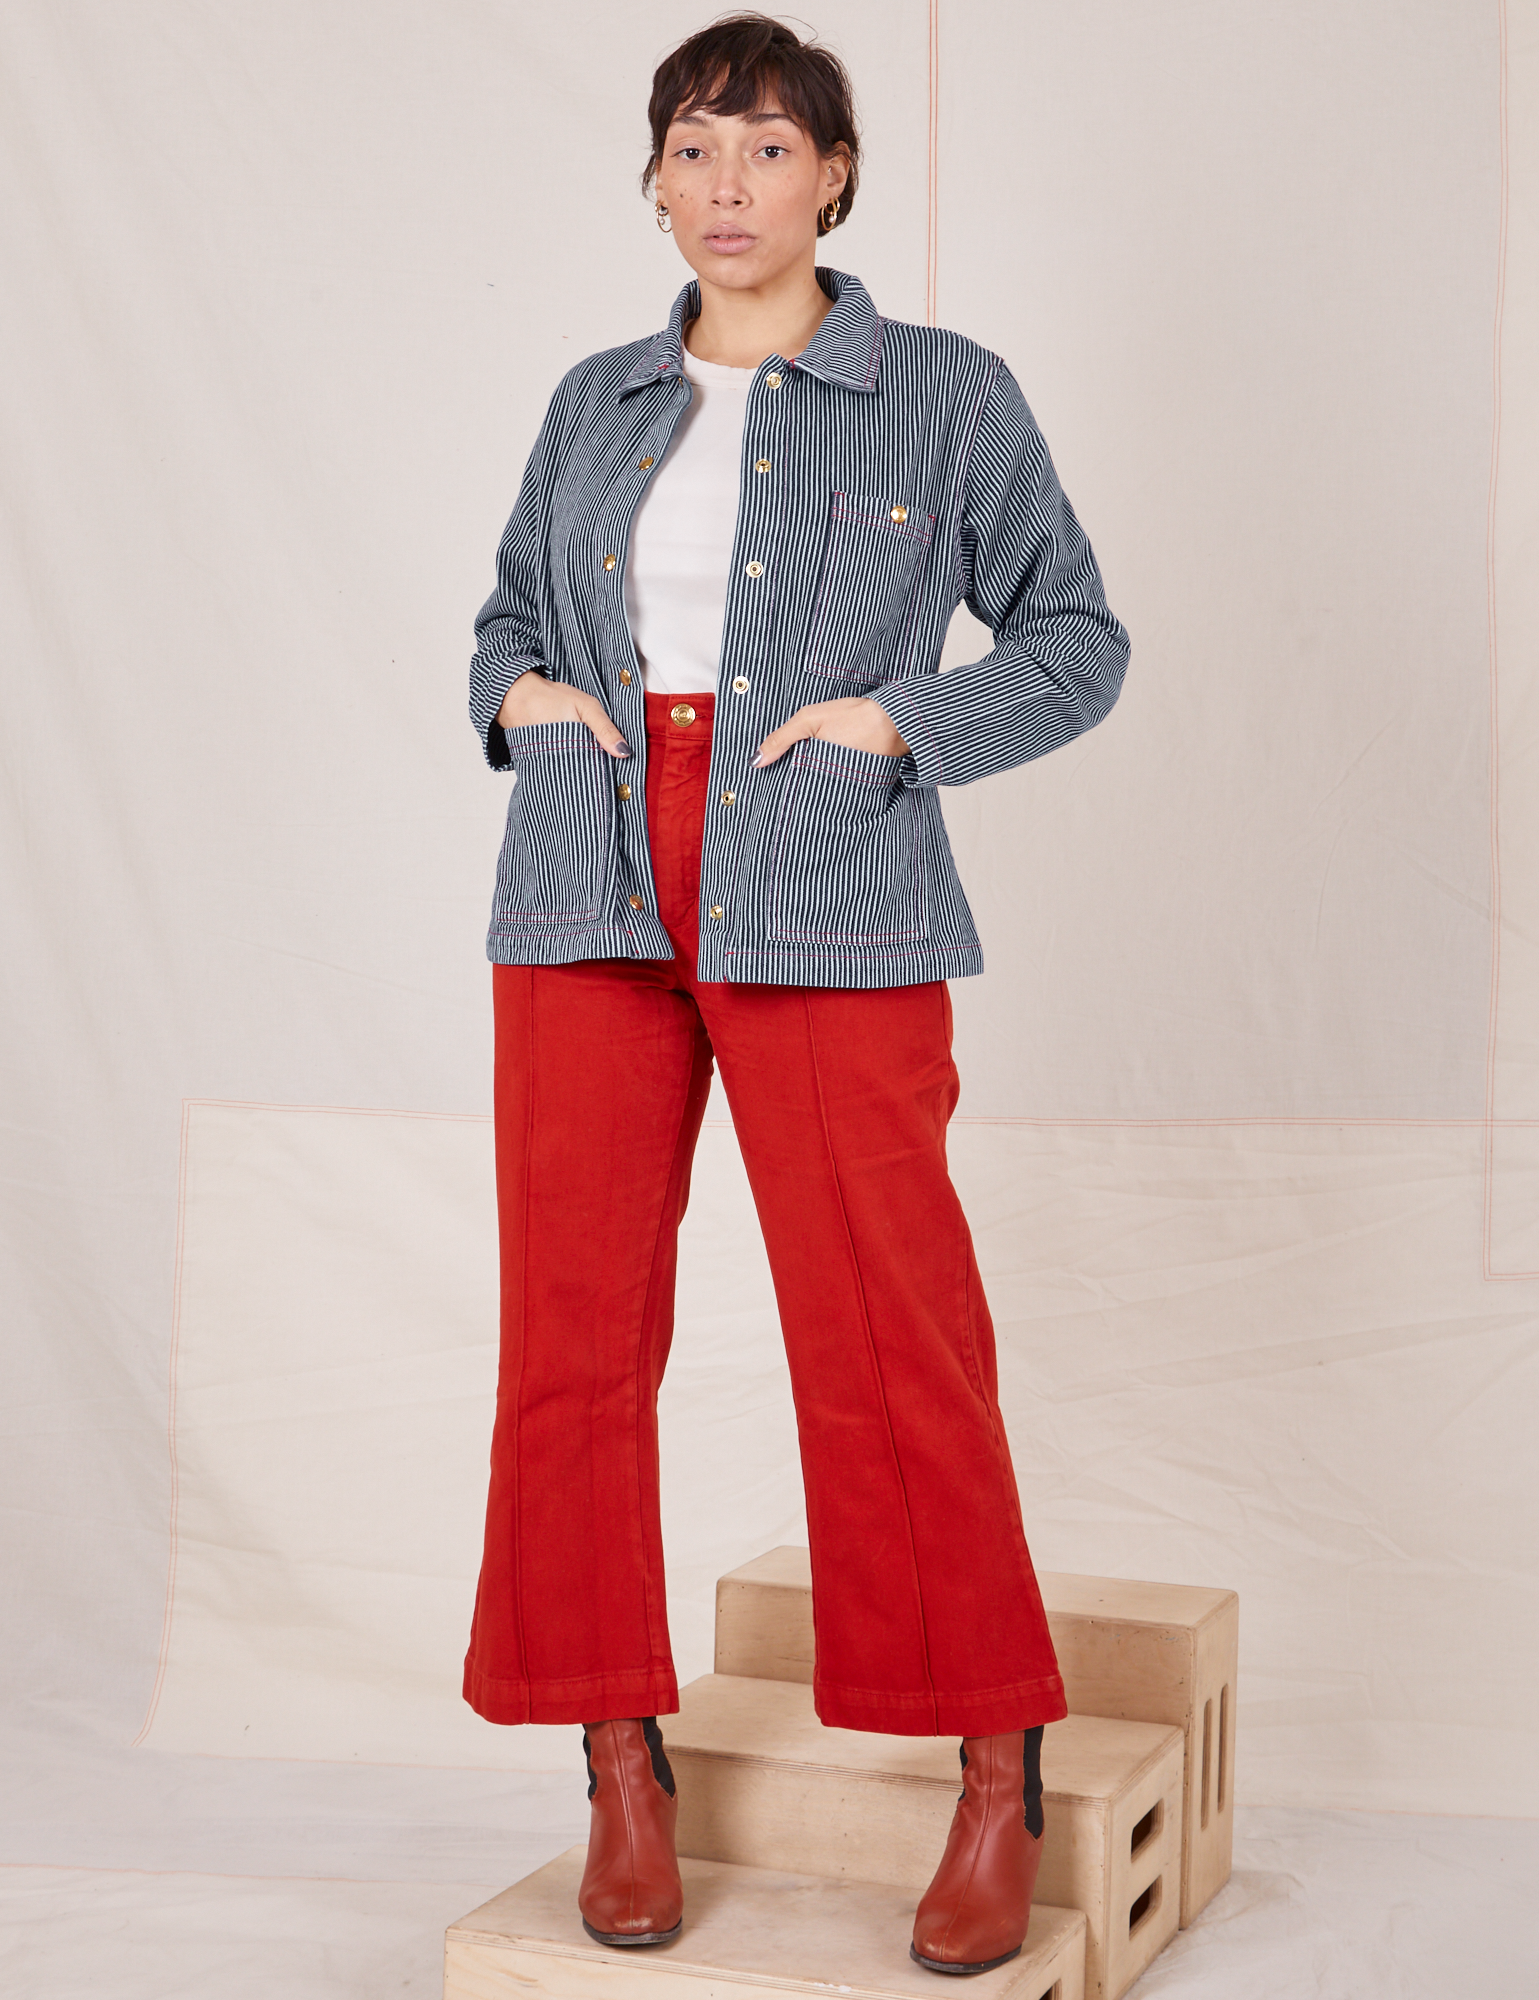 Tiara is 5&#39;4&quot; and wearing XS Railroad Stripe Denim Work Jacket paired with paprika Western Pants